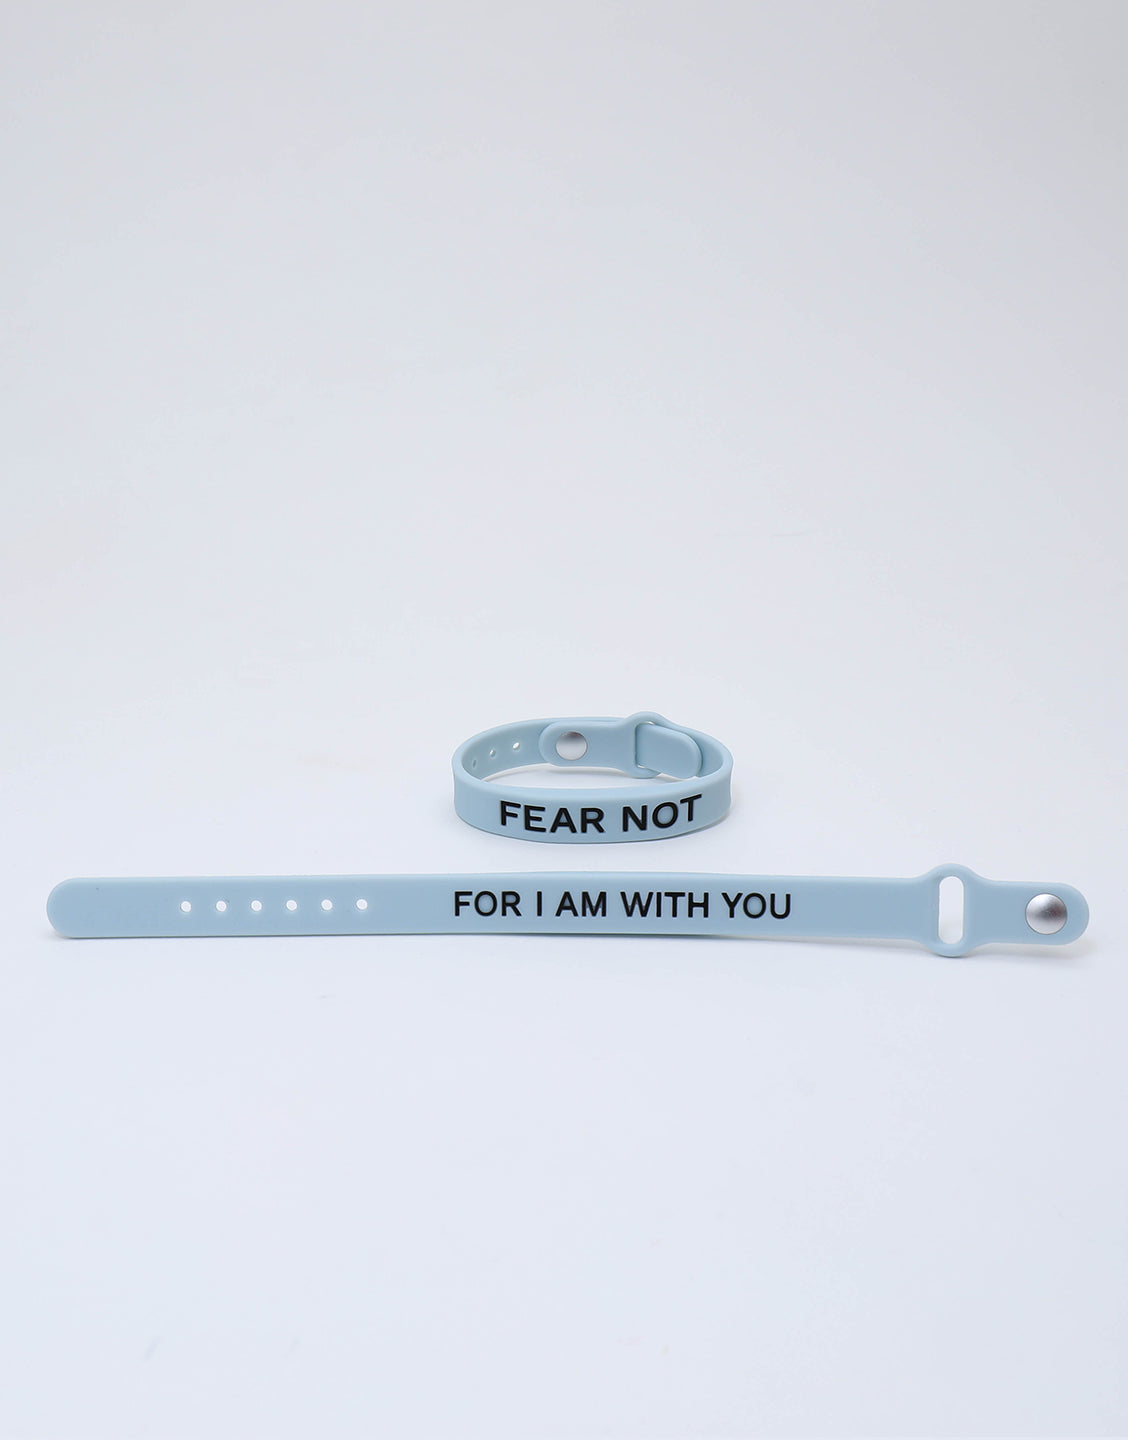 FEAR NOT Premium Silicone Wristband + Free Velvet Pouch- Cloud Blue